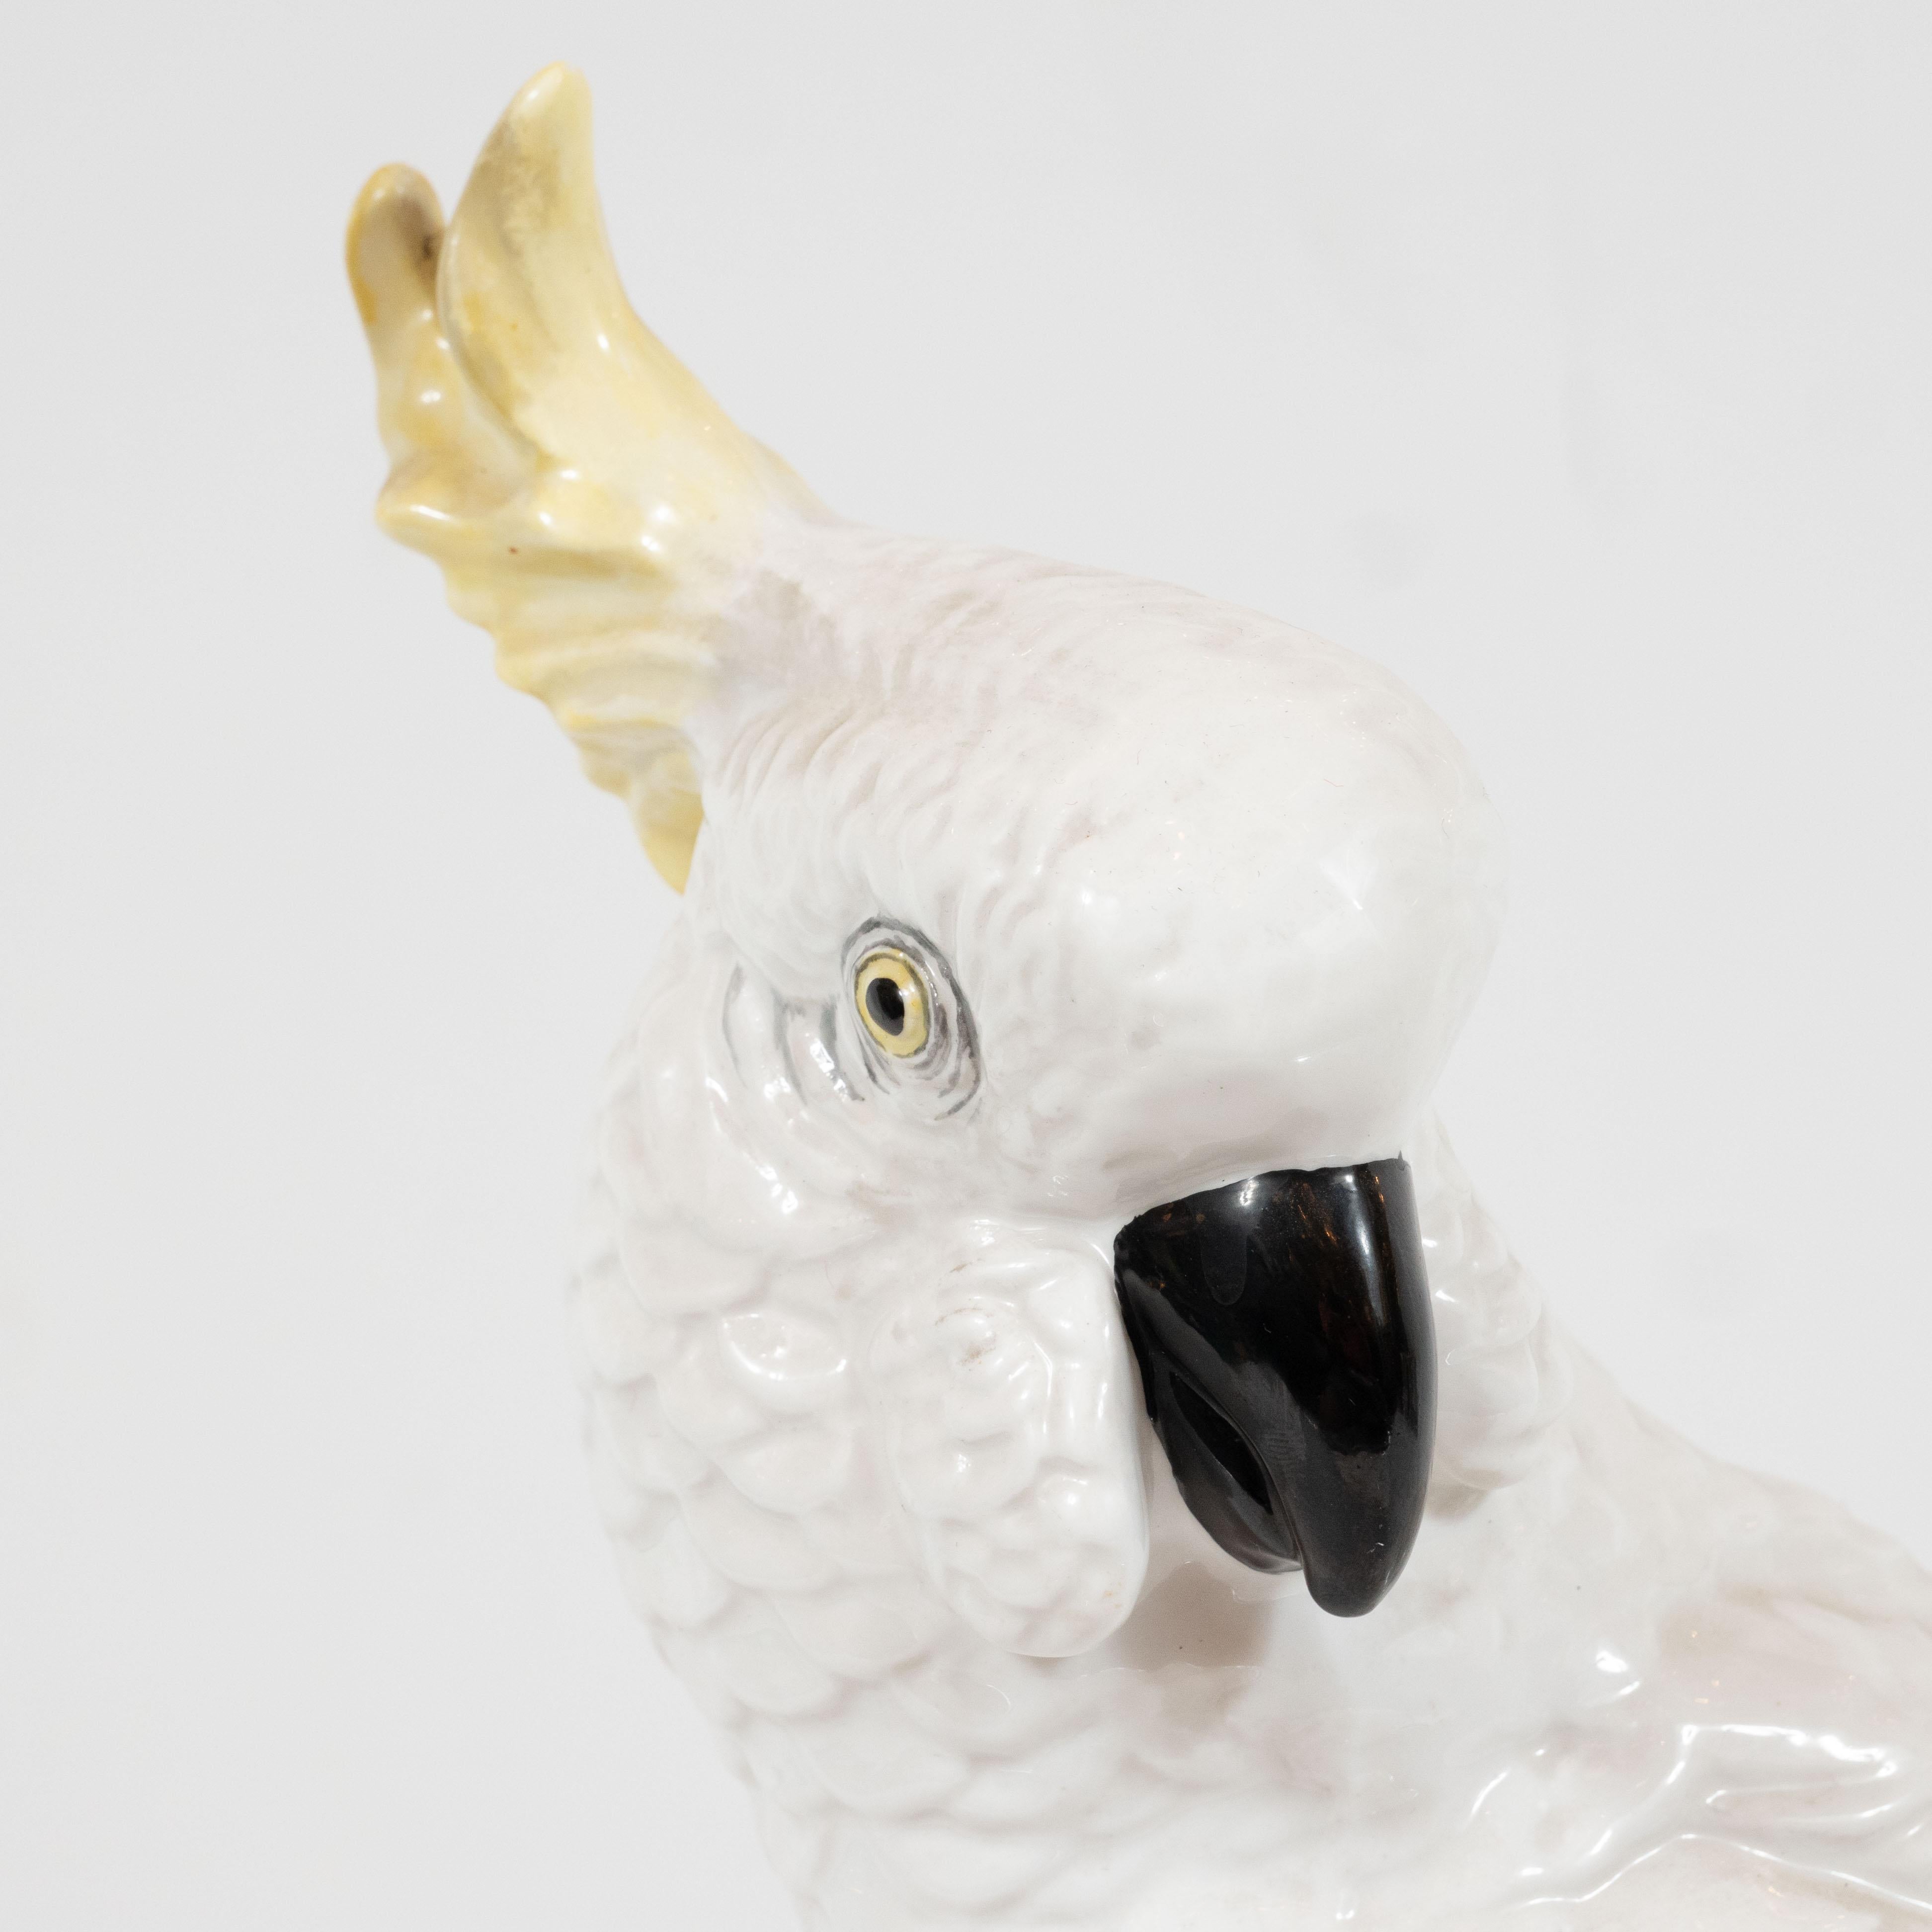 This elegant Mid-Century Modern fine bona china cockatoo was designed by T.J. Jones for Staffordshire, the storied British maker, circa 1950. It features a white cockatoo perched on a sculptural base with foliate detailing. The bird's head is